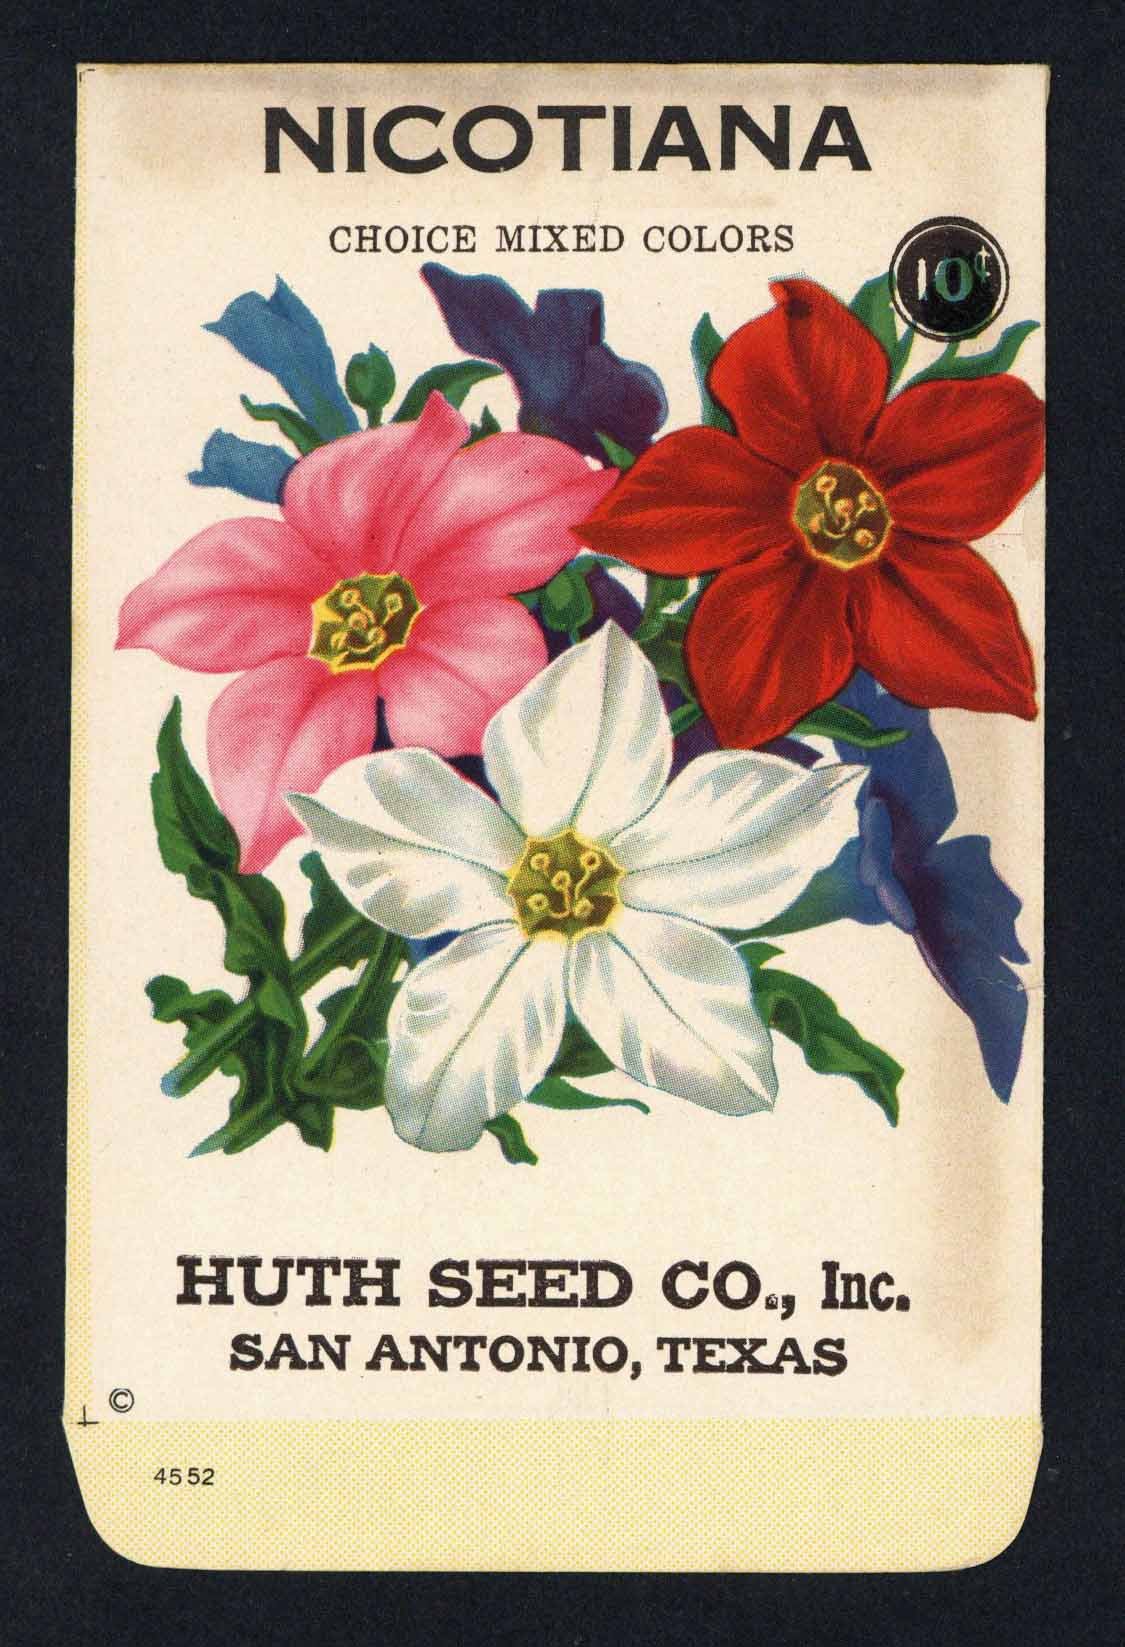 Nicotiana Vintage Huth Seed Co. Seed Packet